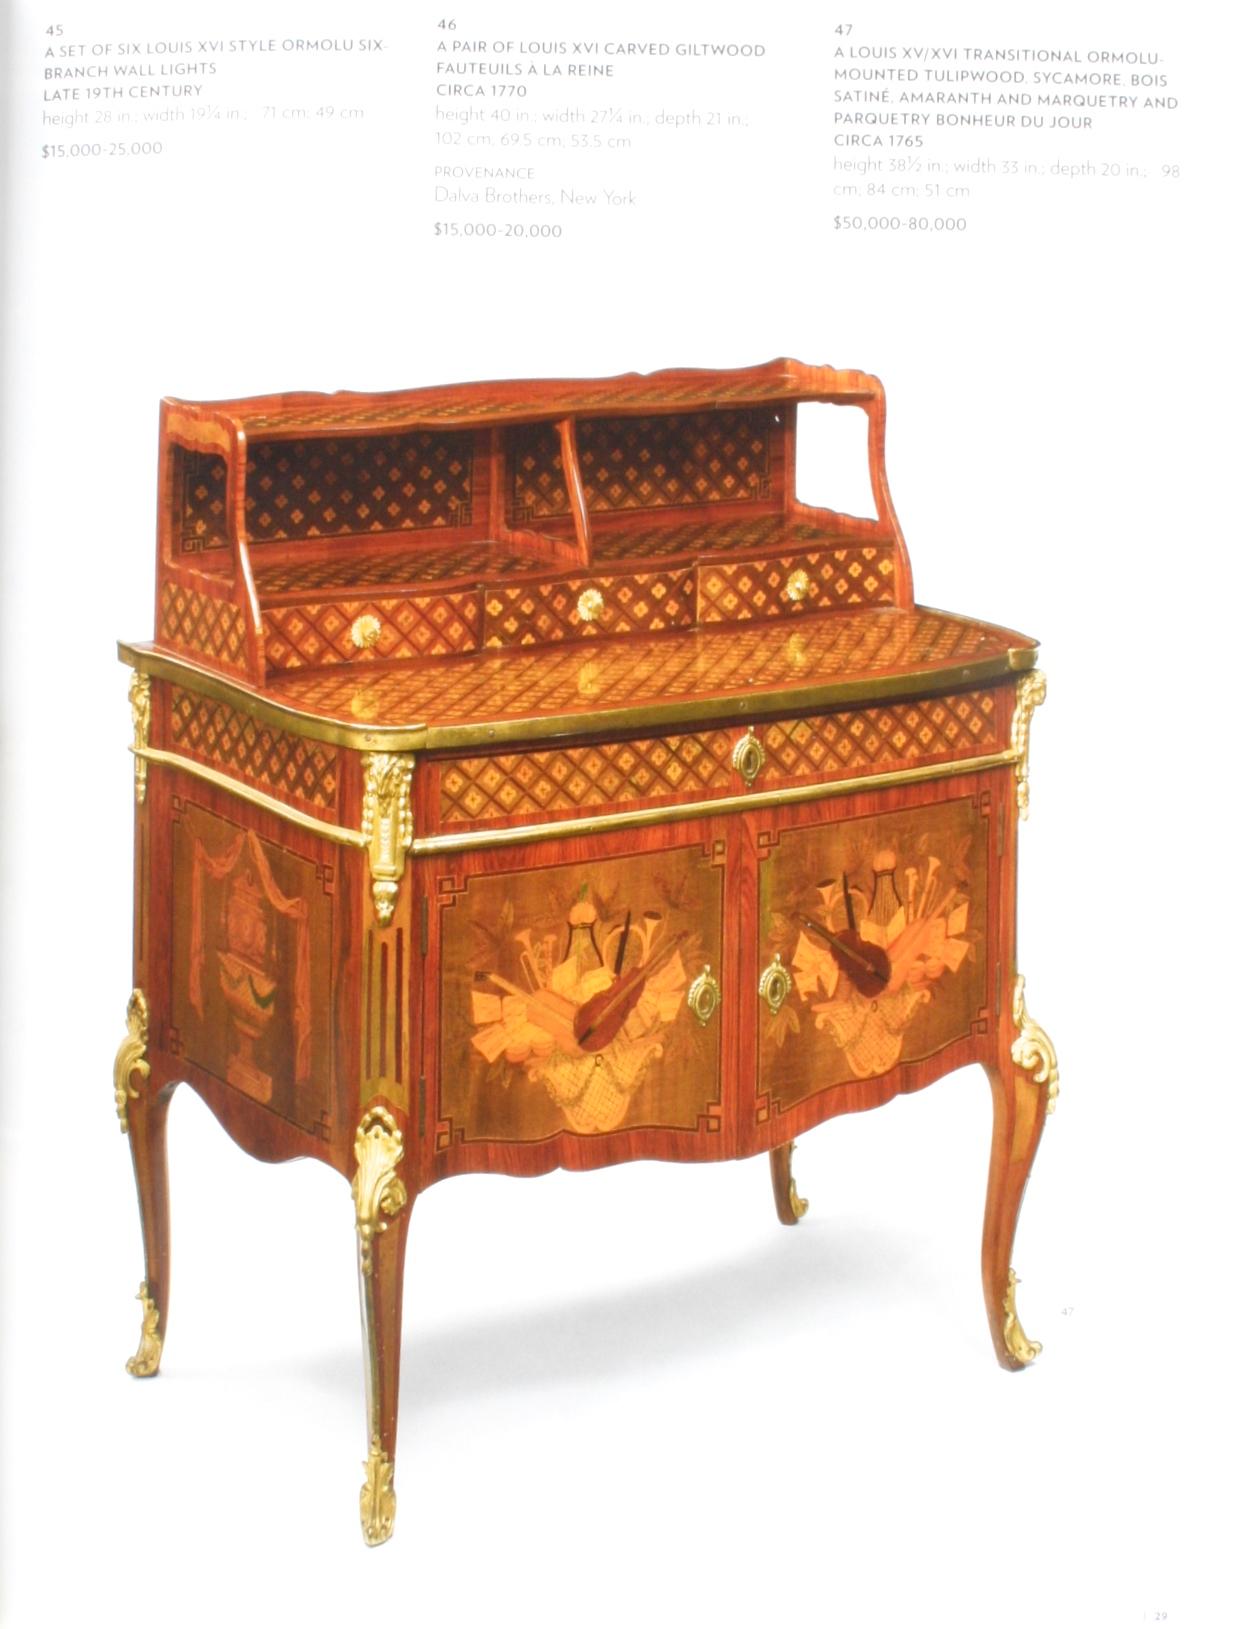 Contemporary Important French Furniture, Ceramics & Carpets, the Estate of Mrs. Robert Lehman